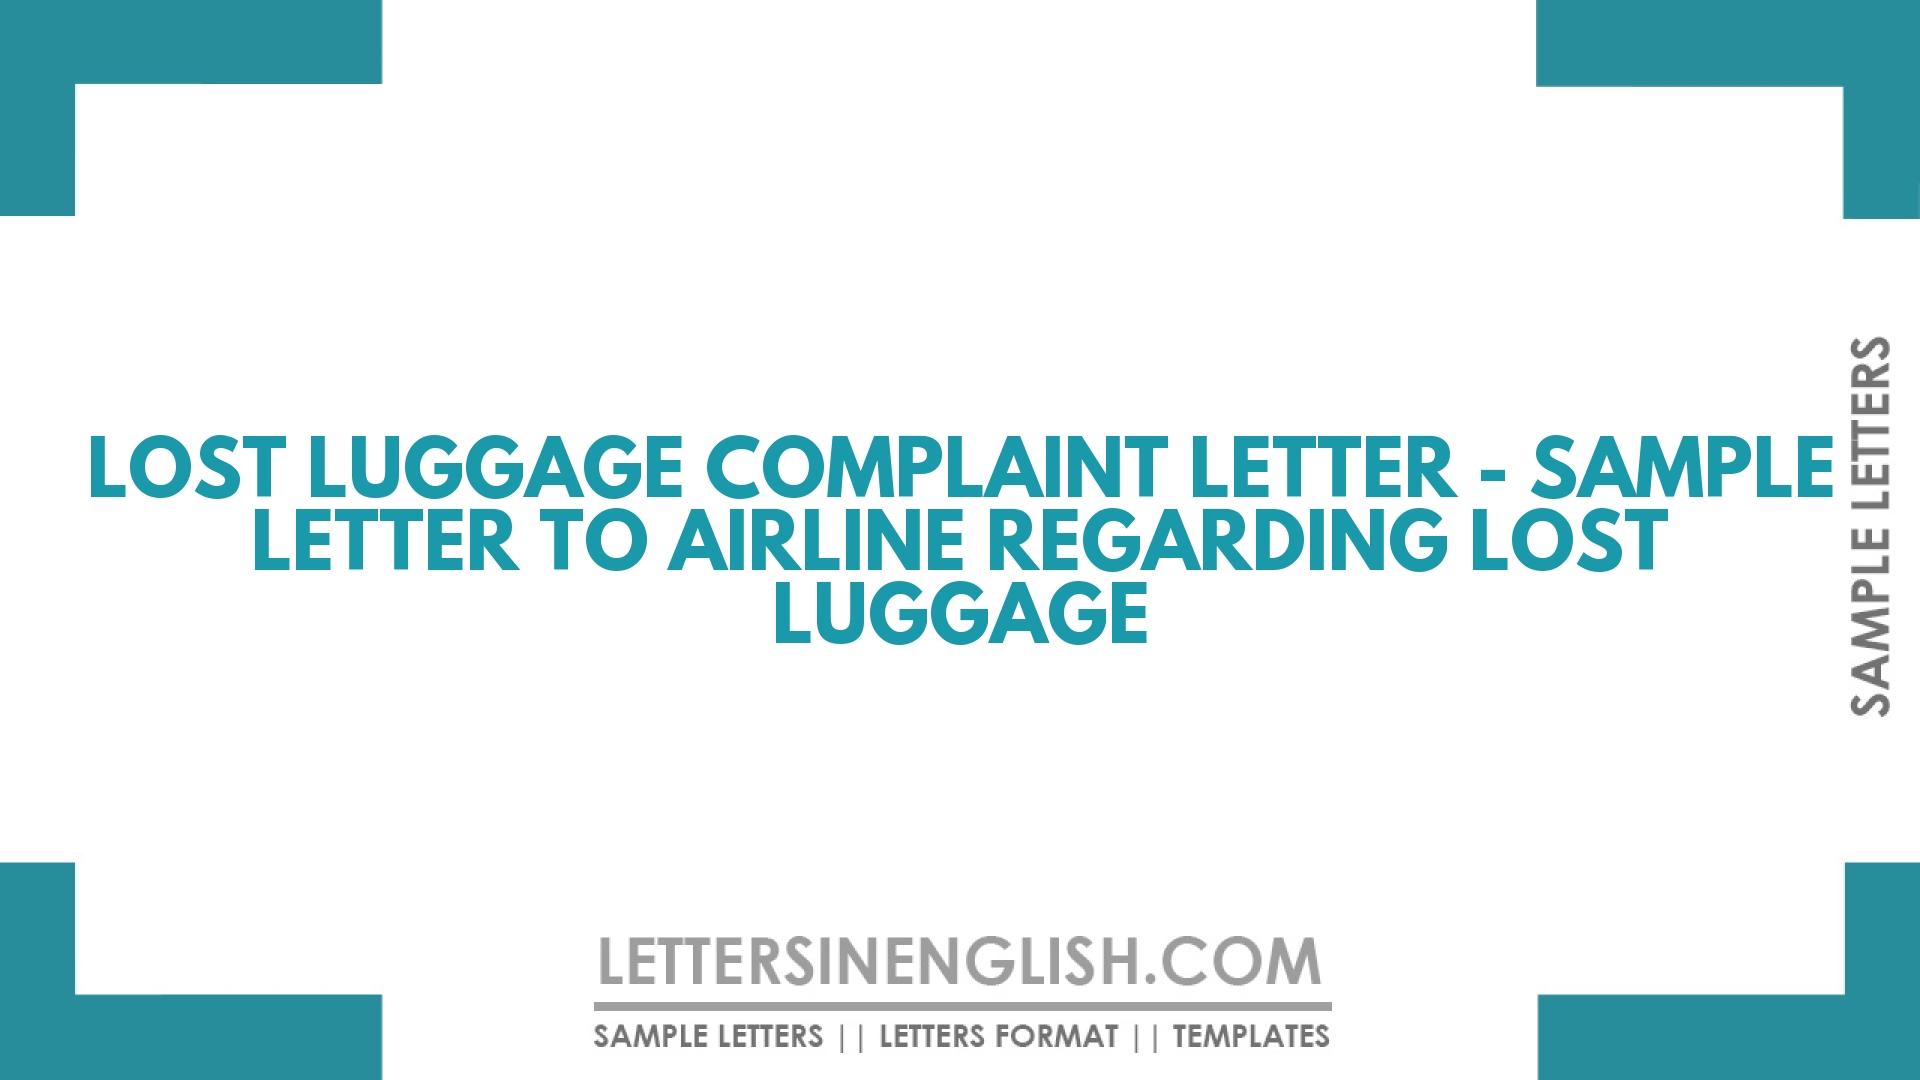 Lost Luggage Complaint Letter – Sample Letter to Airline Regarding Lost Luggage